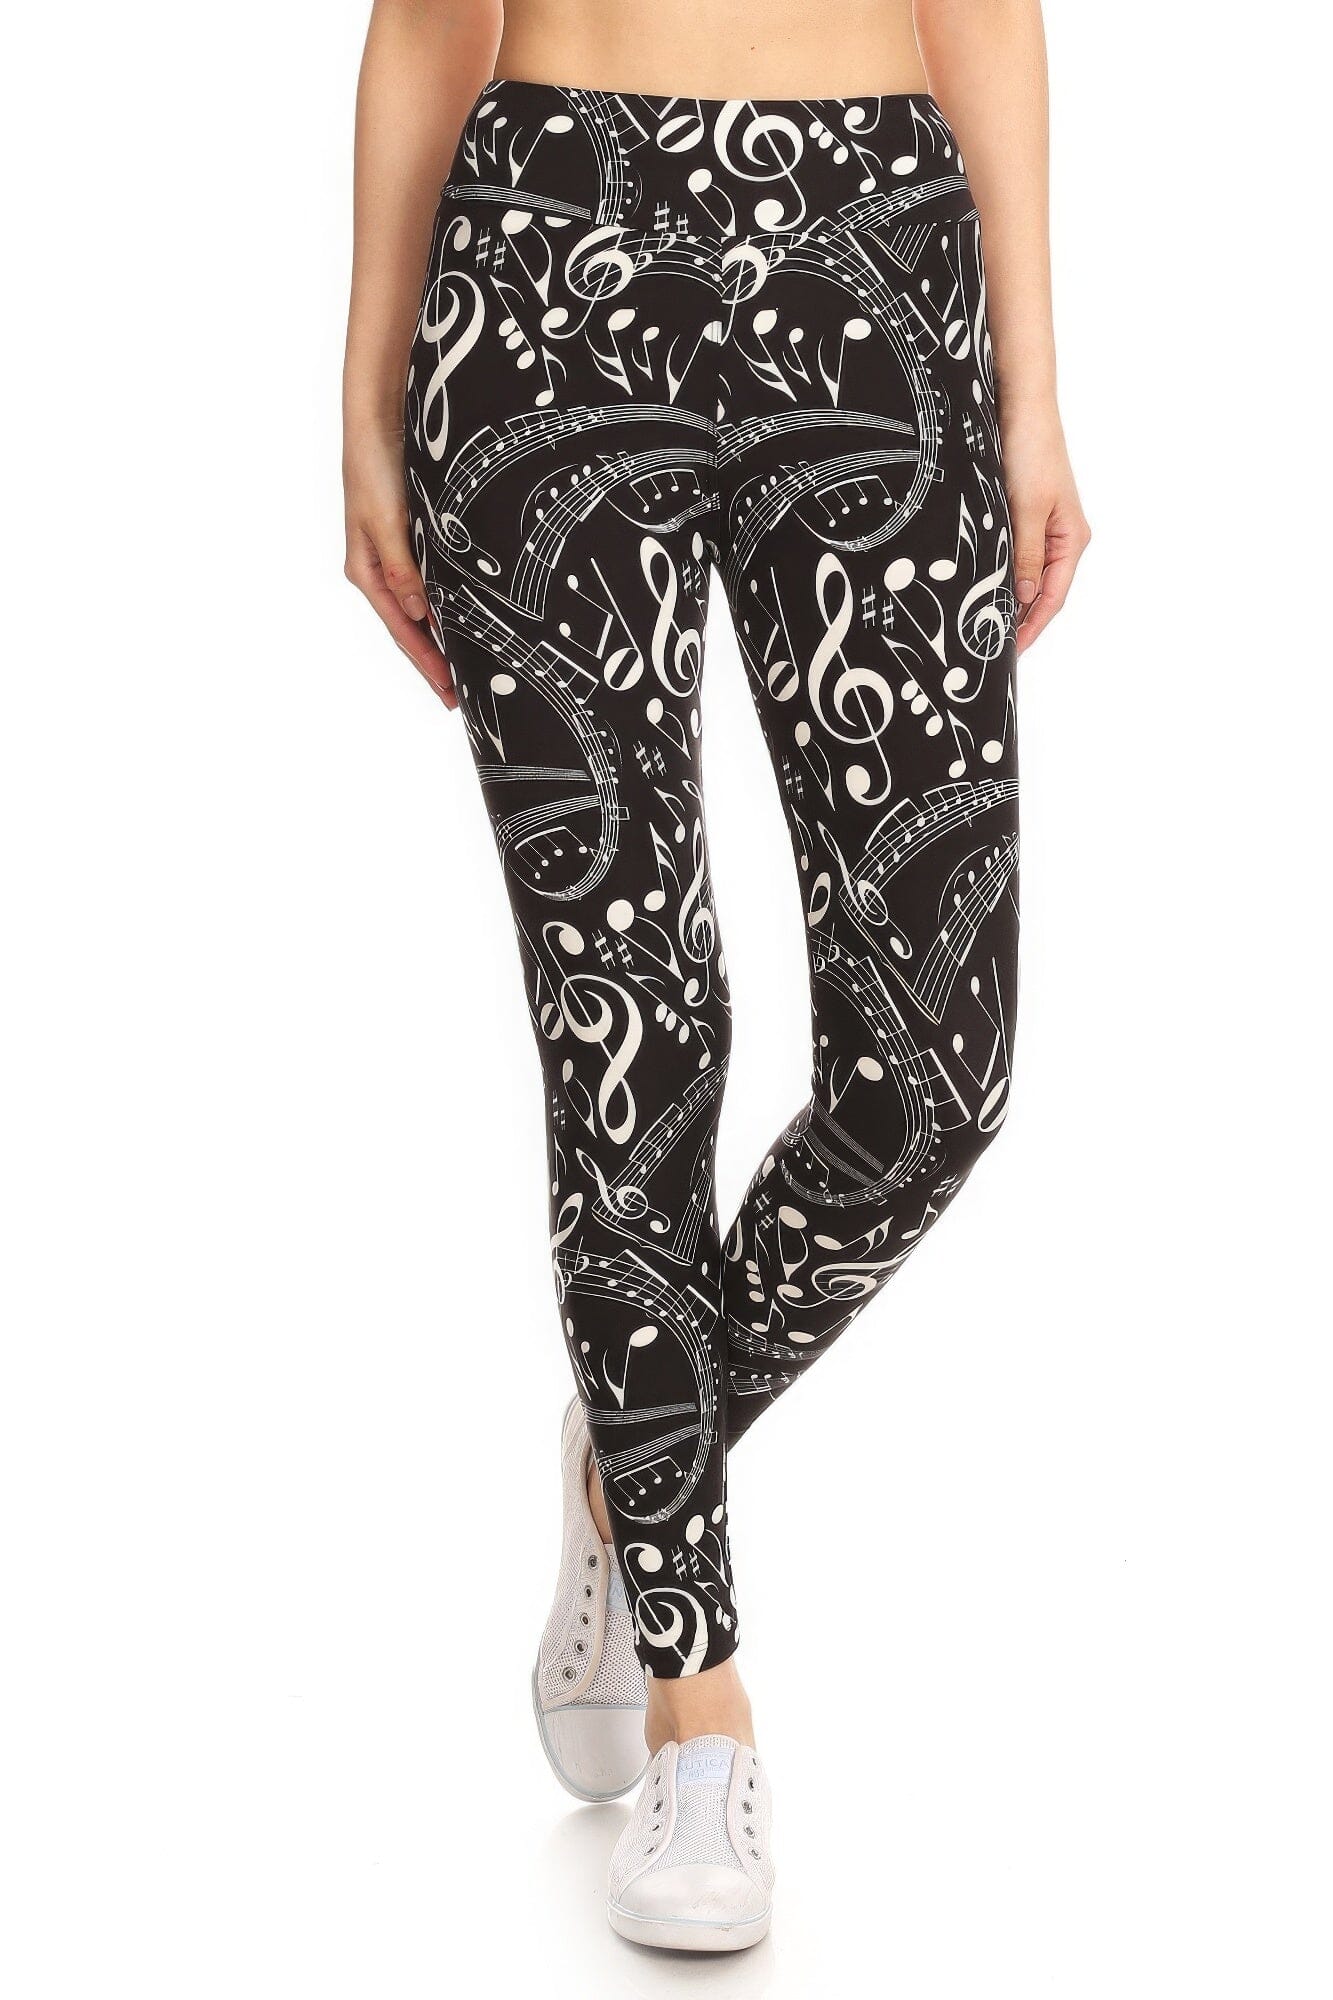 Yoga Style Banded Lined Music Note Print In A Slim Fitting Style With A Banded High Waist Full Length Leggings Pants jehouze 